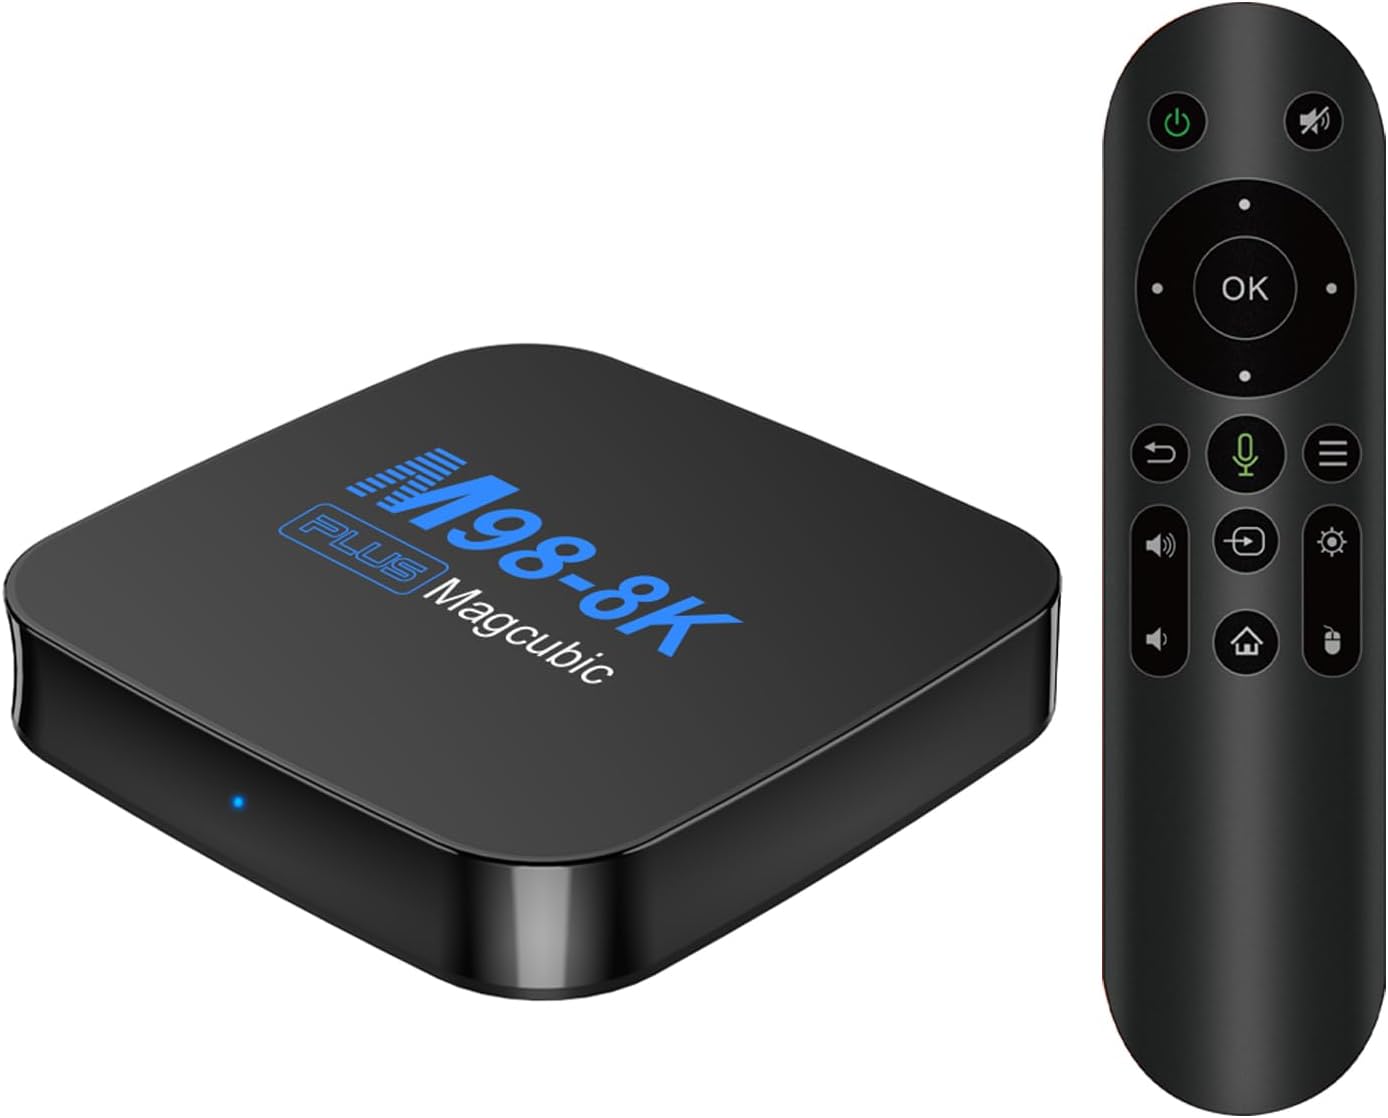 TV Box Android 13.0 TV Box, 2GB 16GB Allwinner H618 Cortex-A53 Android Box Support YouTube/Prime Video/Netflix 4K HDR H.265 HEVC 2.4G/5G WiFi BT5.0 with Remote Control